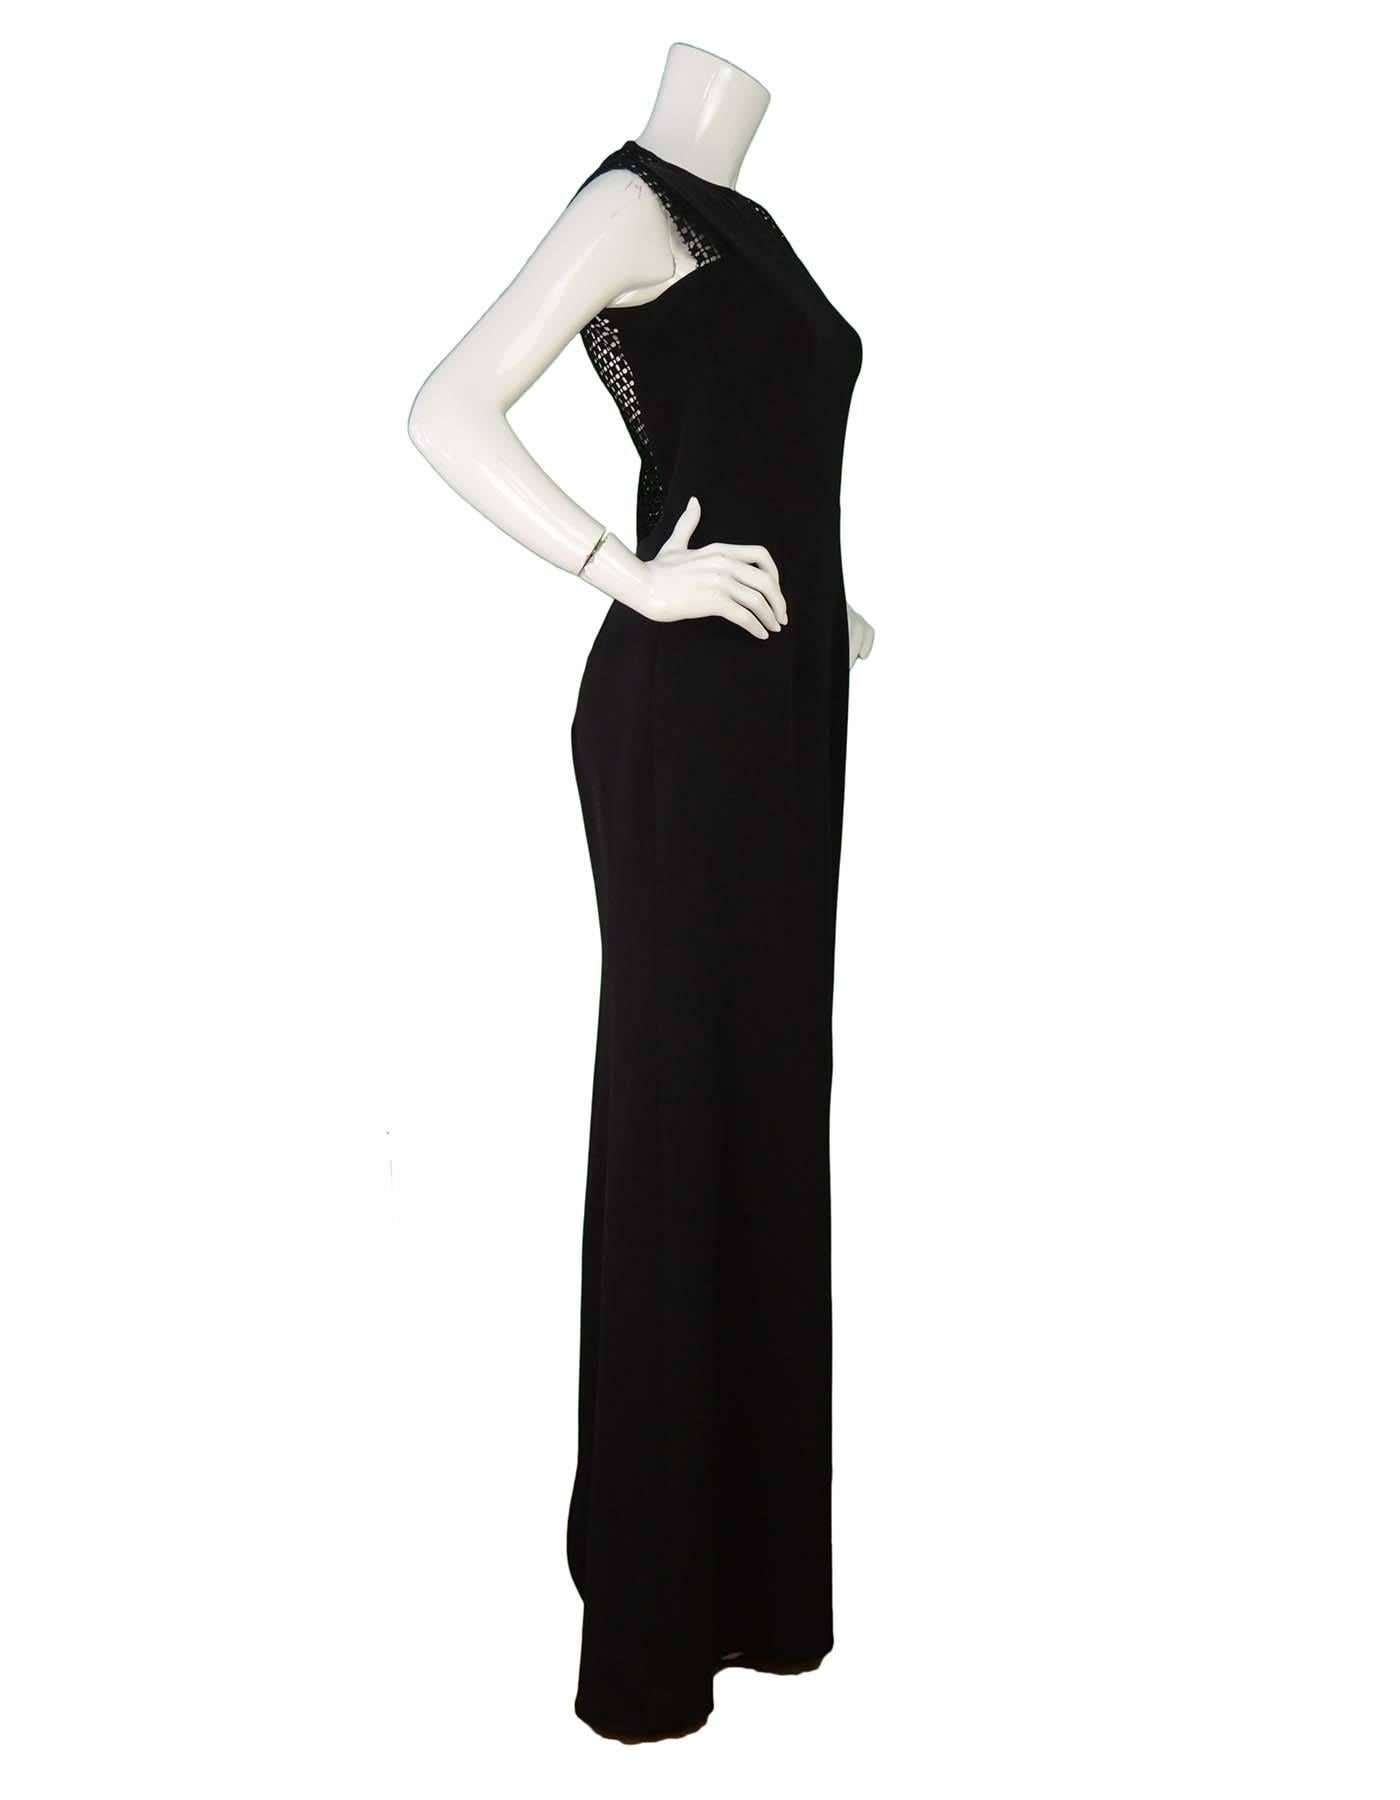 Dress No241 Black Gown Sz 8
Features windowpane lace detail and exposed back zip closure

Made In: England
Color: Black
Composition: 50% Silk, 50% Wool
Lining: None
Closure/Opening: Full exposed back zip closure
Overall Condition: Excellent